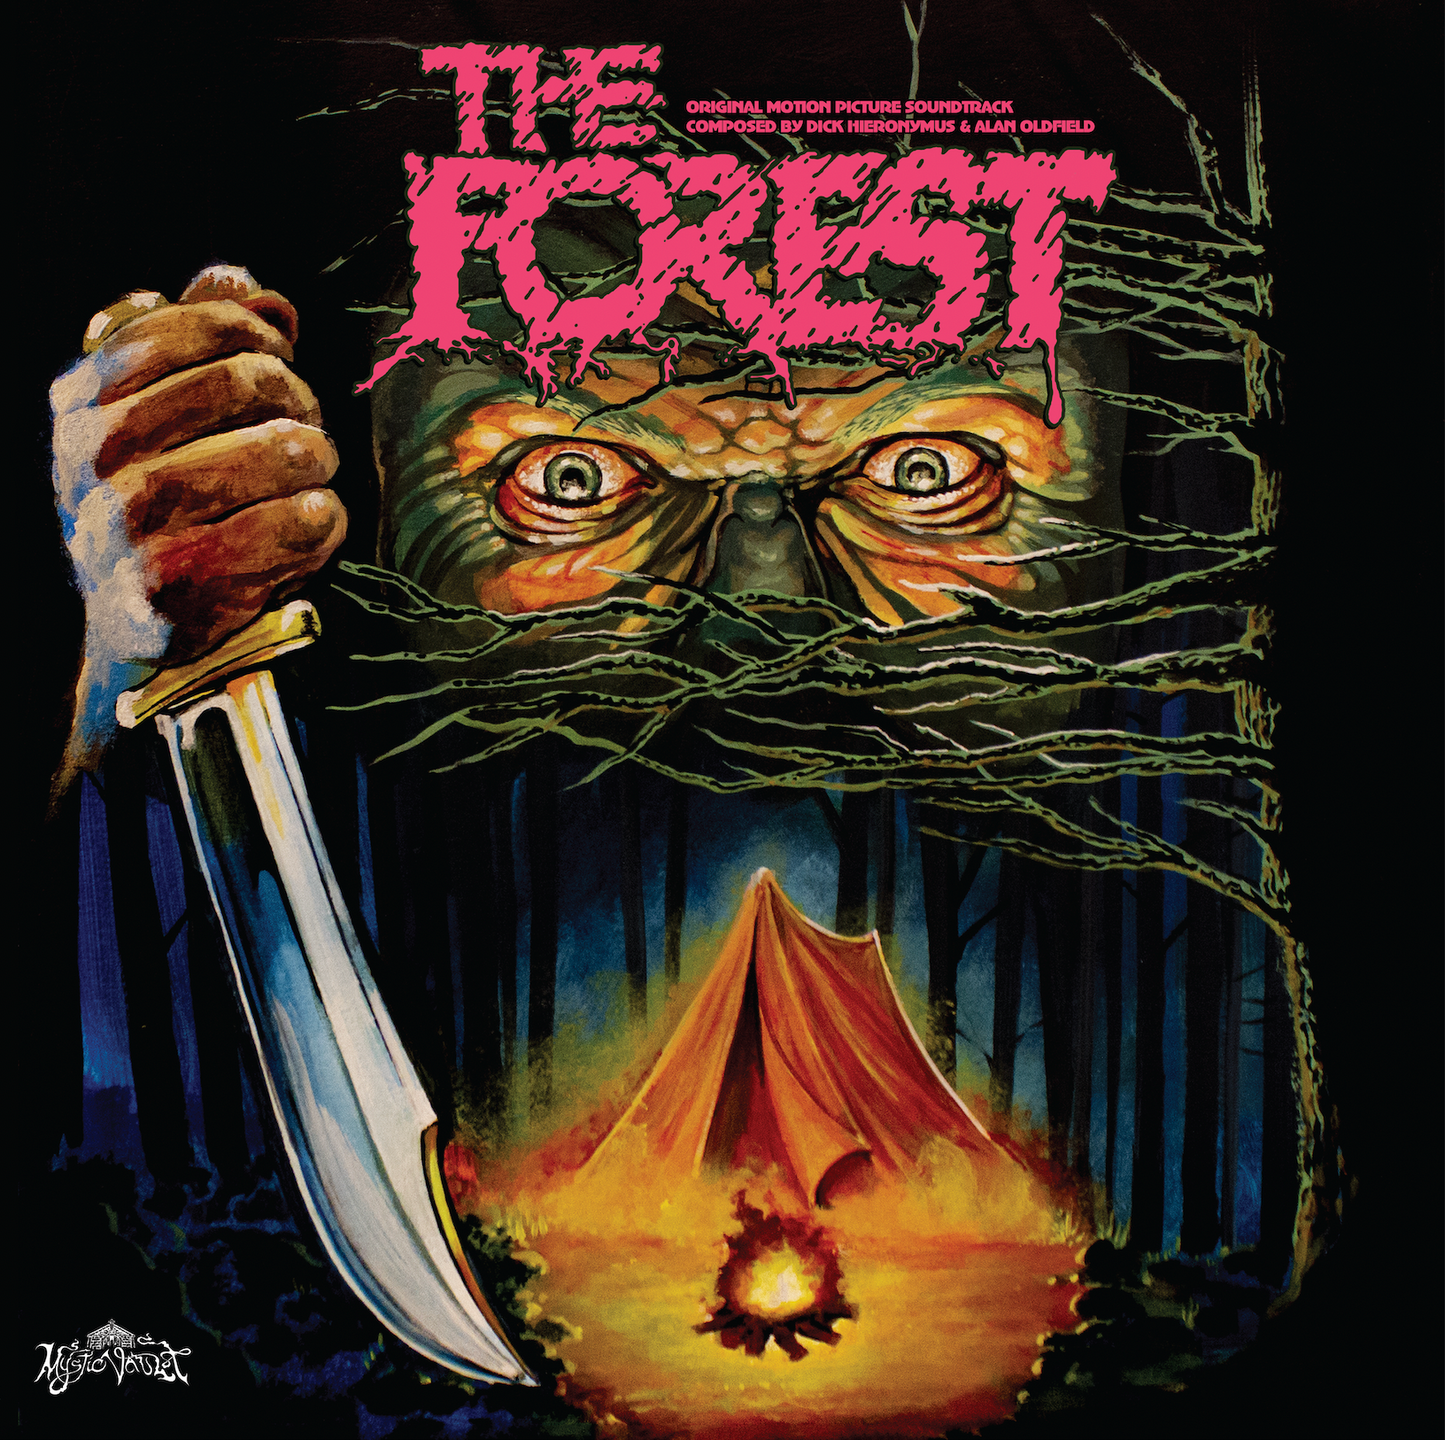 THE FOREST (1982) SOUNDTRACK LP